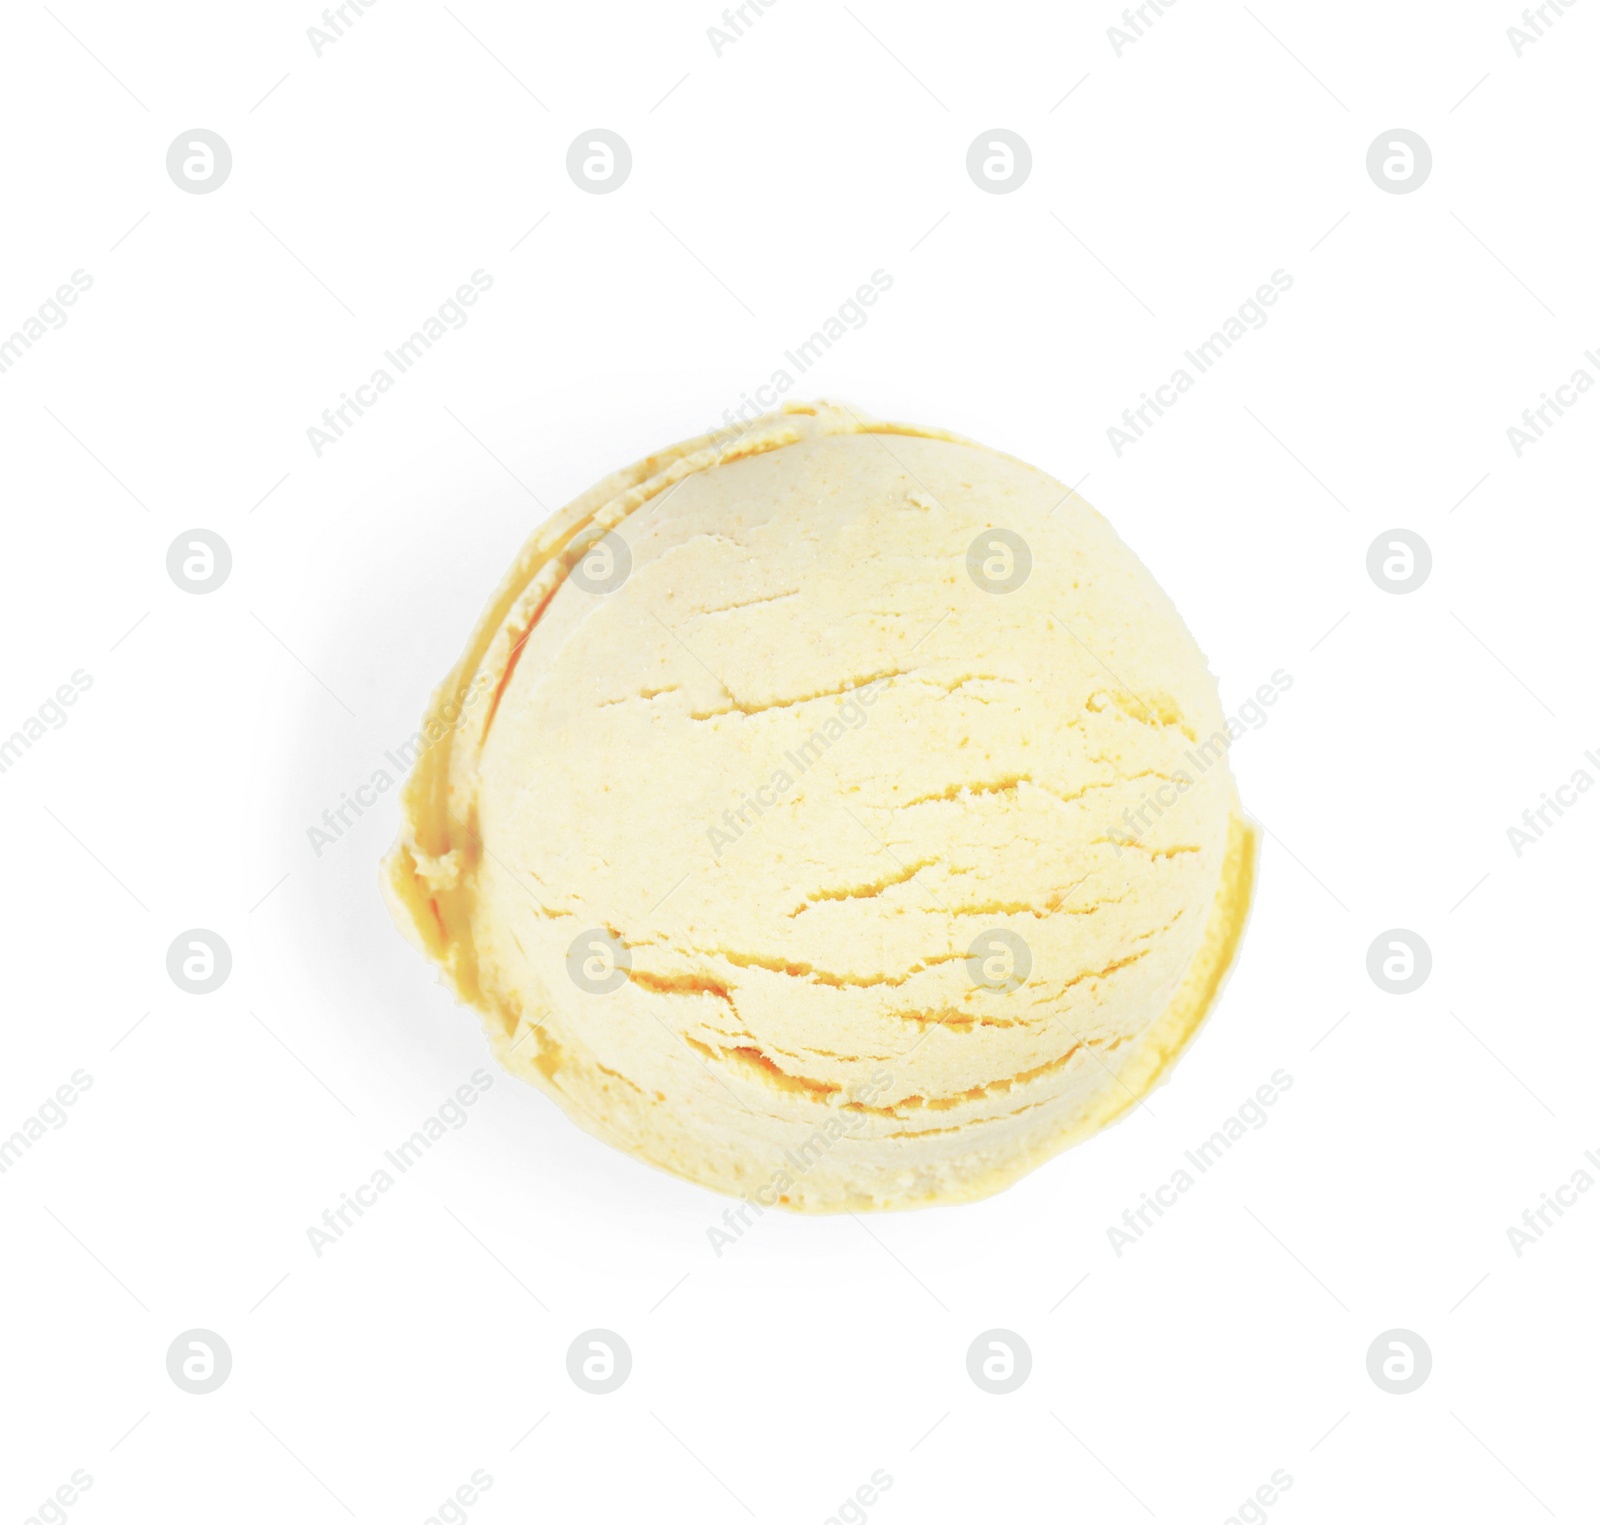 Photo of Ball of delicious vanilla ice cream on white background, top view